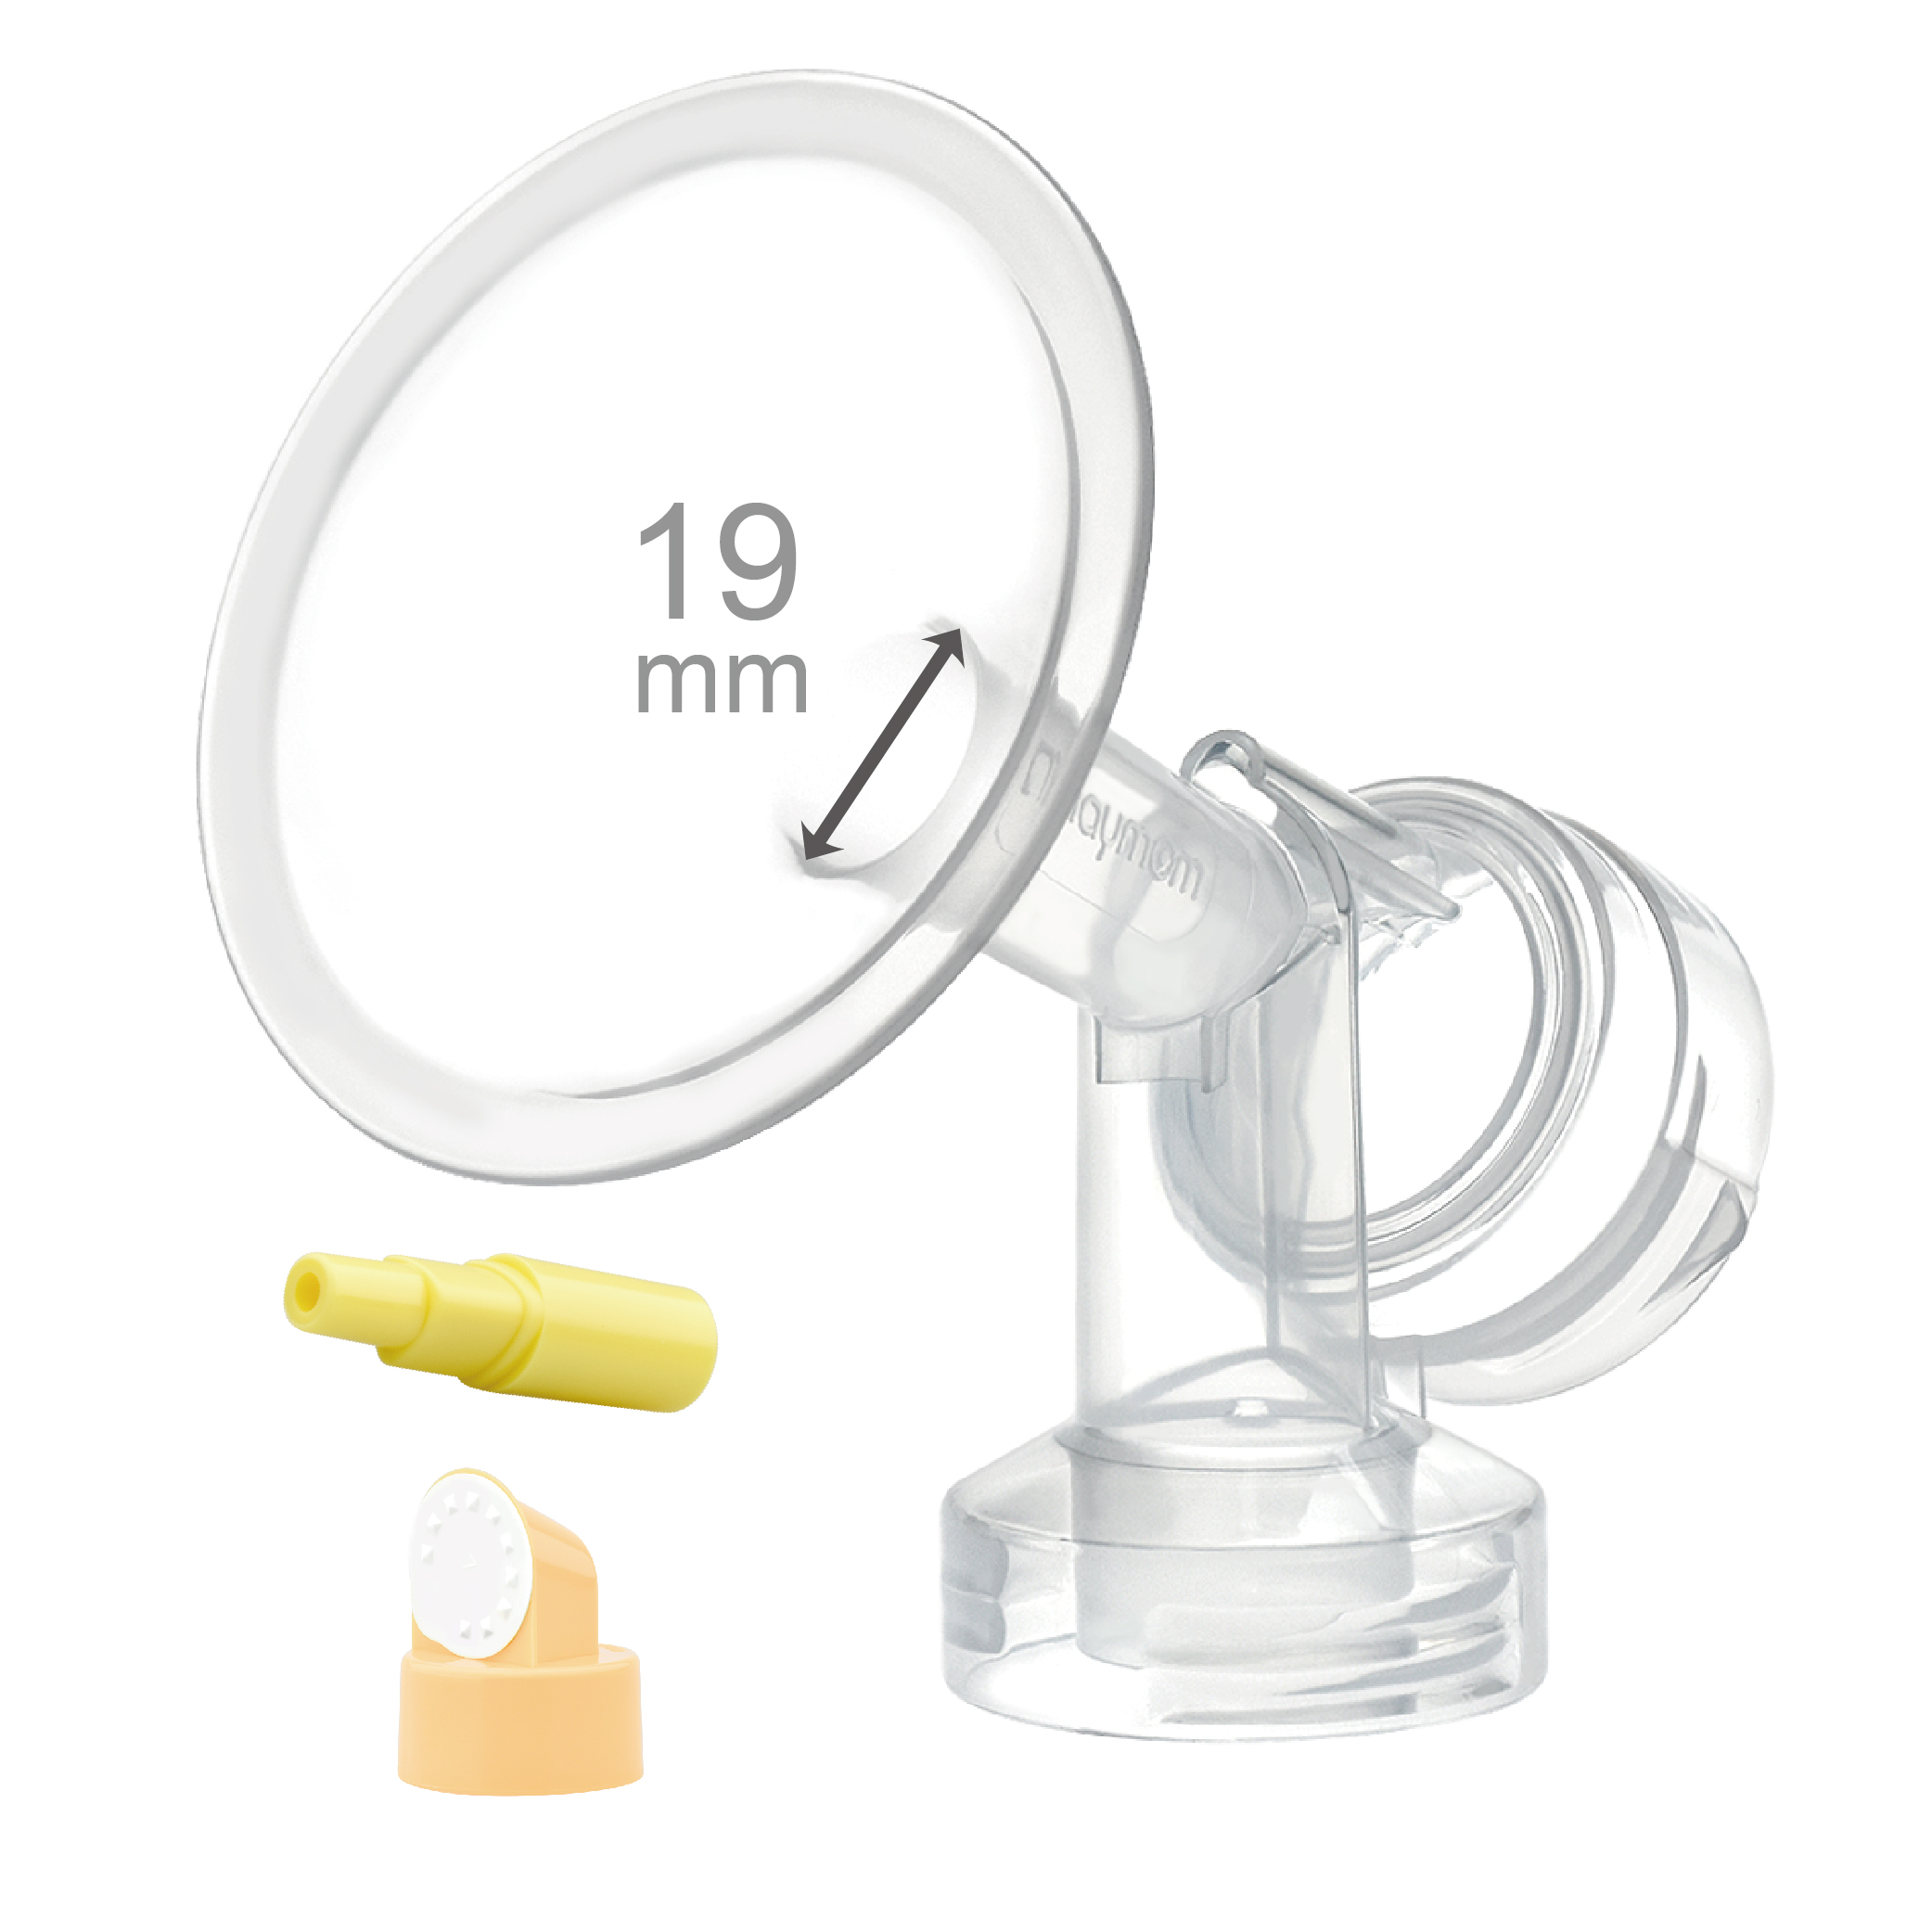 (image for) 19 mm Extra Small Flange w/ Valve and Membrane for SpeCtra Breast Pumps S1, S2, M1, Spectra 9; Narrow (Standard) Bottle Neck; 1 pc